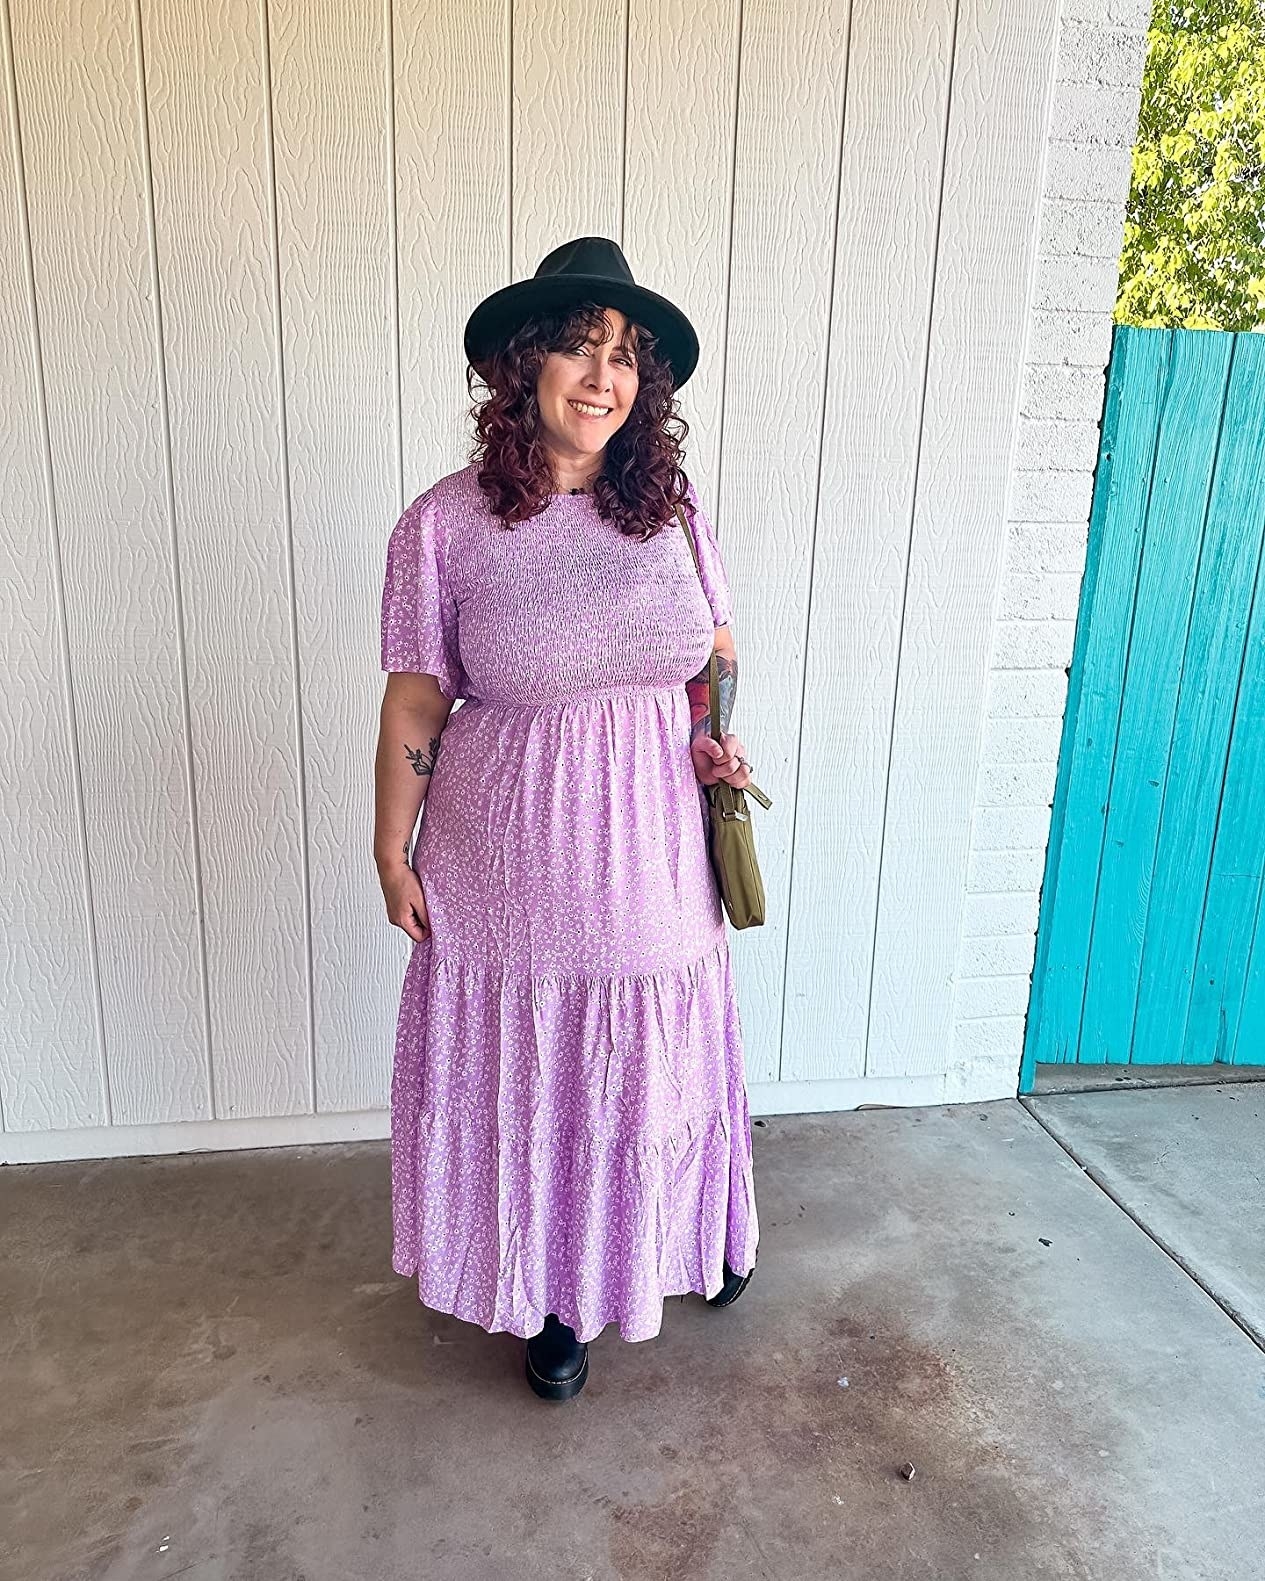 A reviewer wearing a purple dress with black accessories